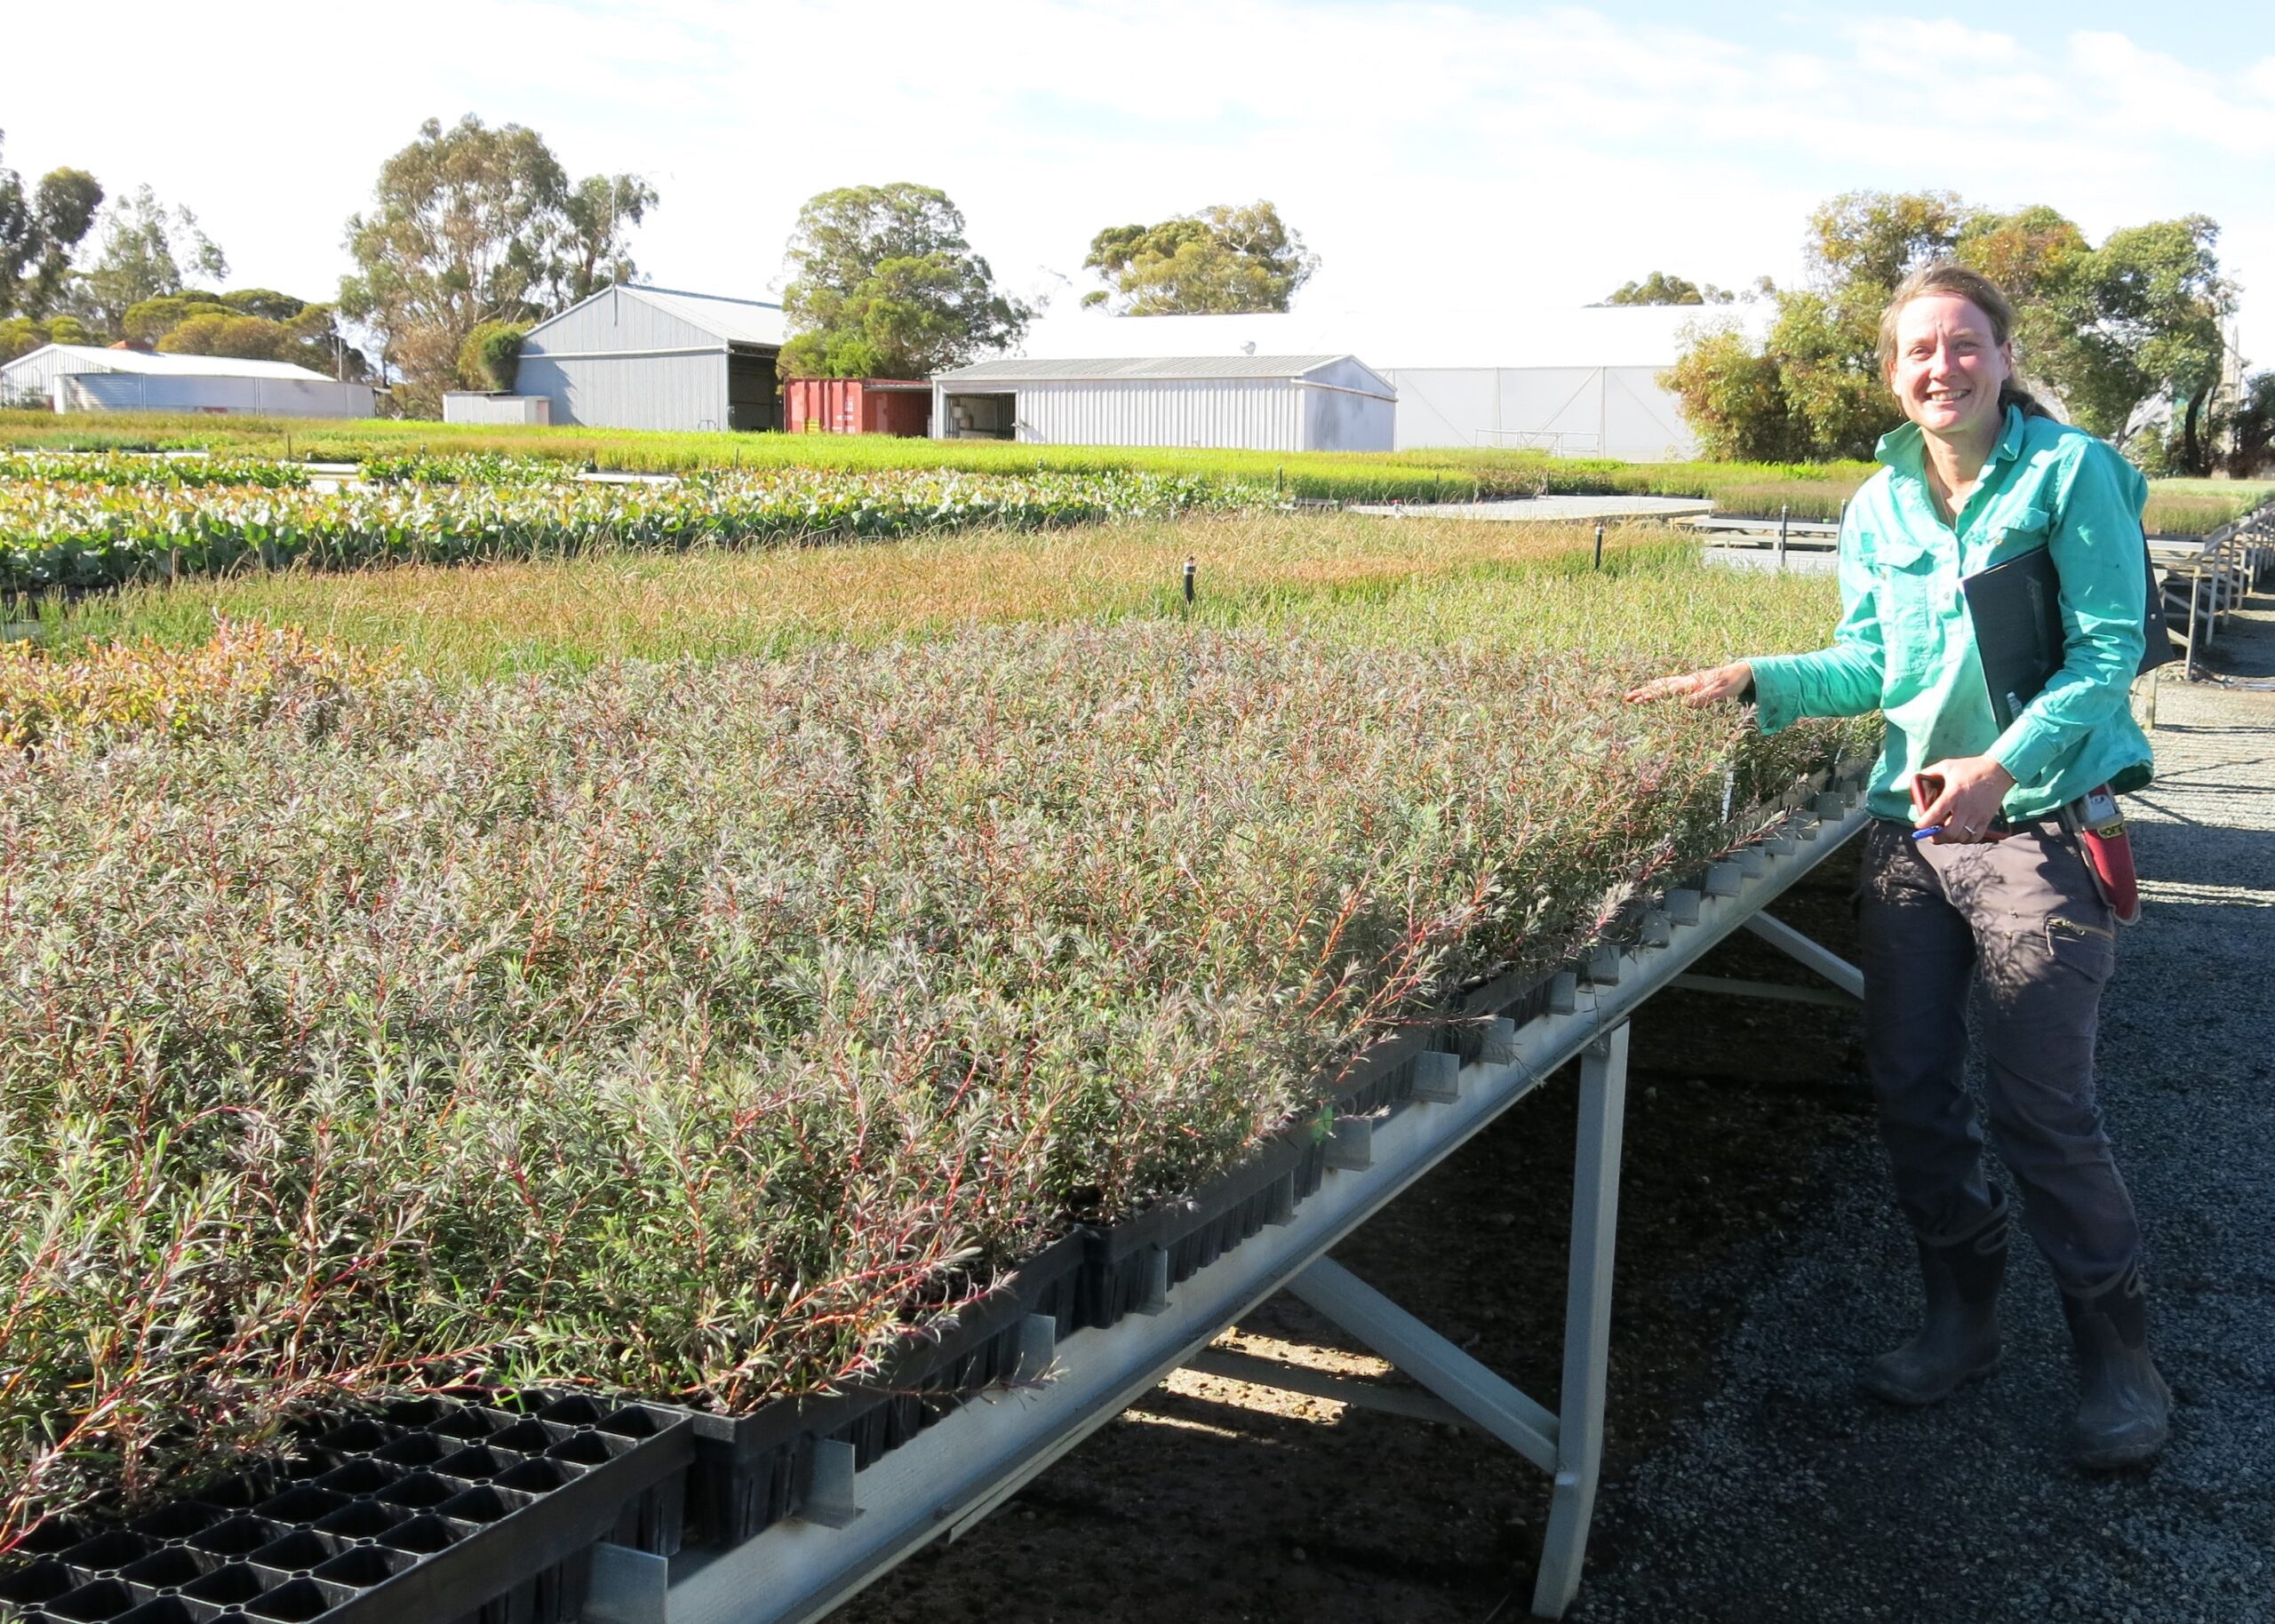 Lady in blue jacket standing next to trays of native seedlings.